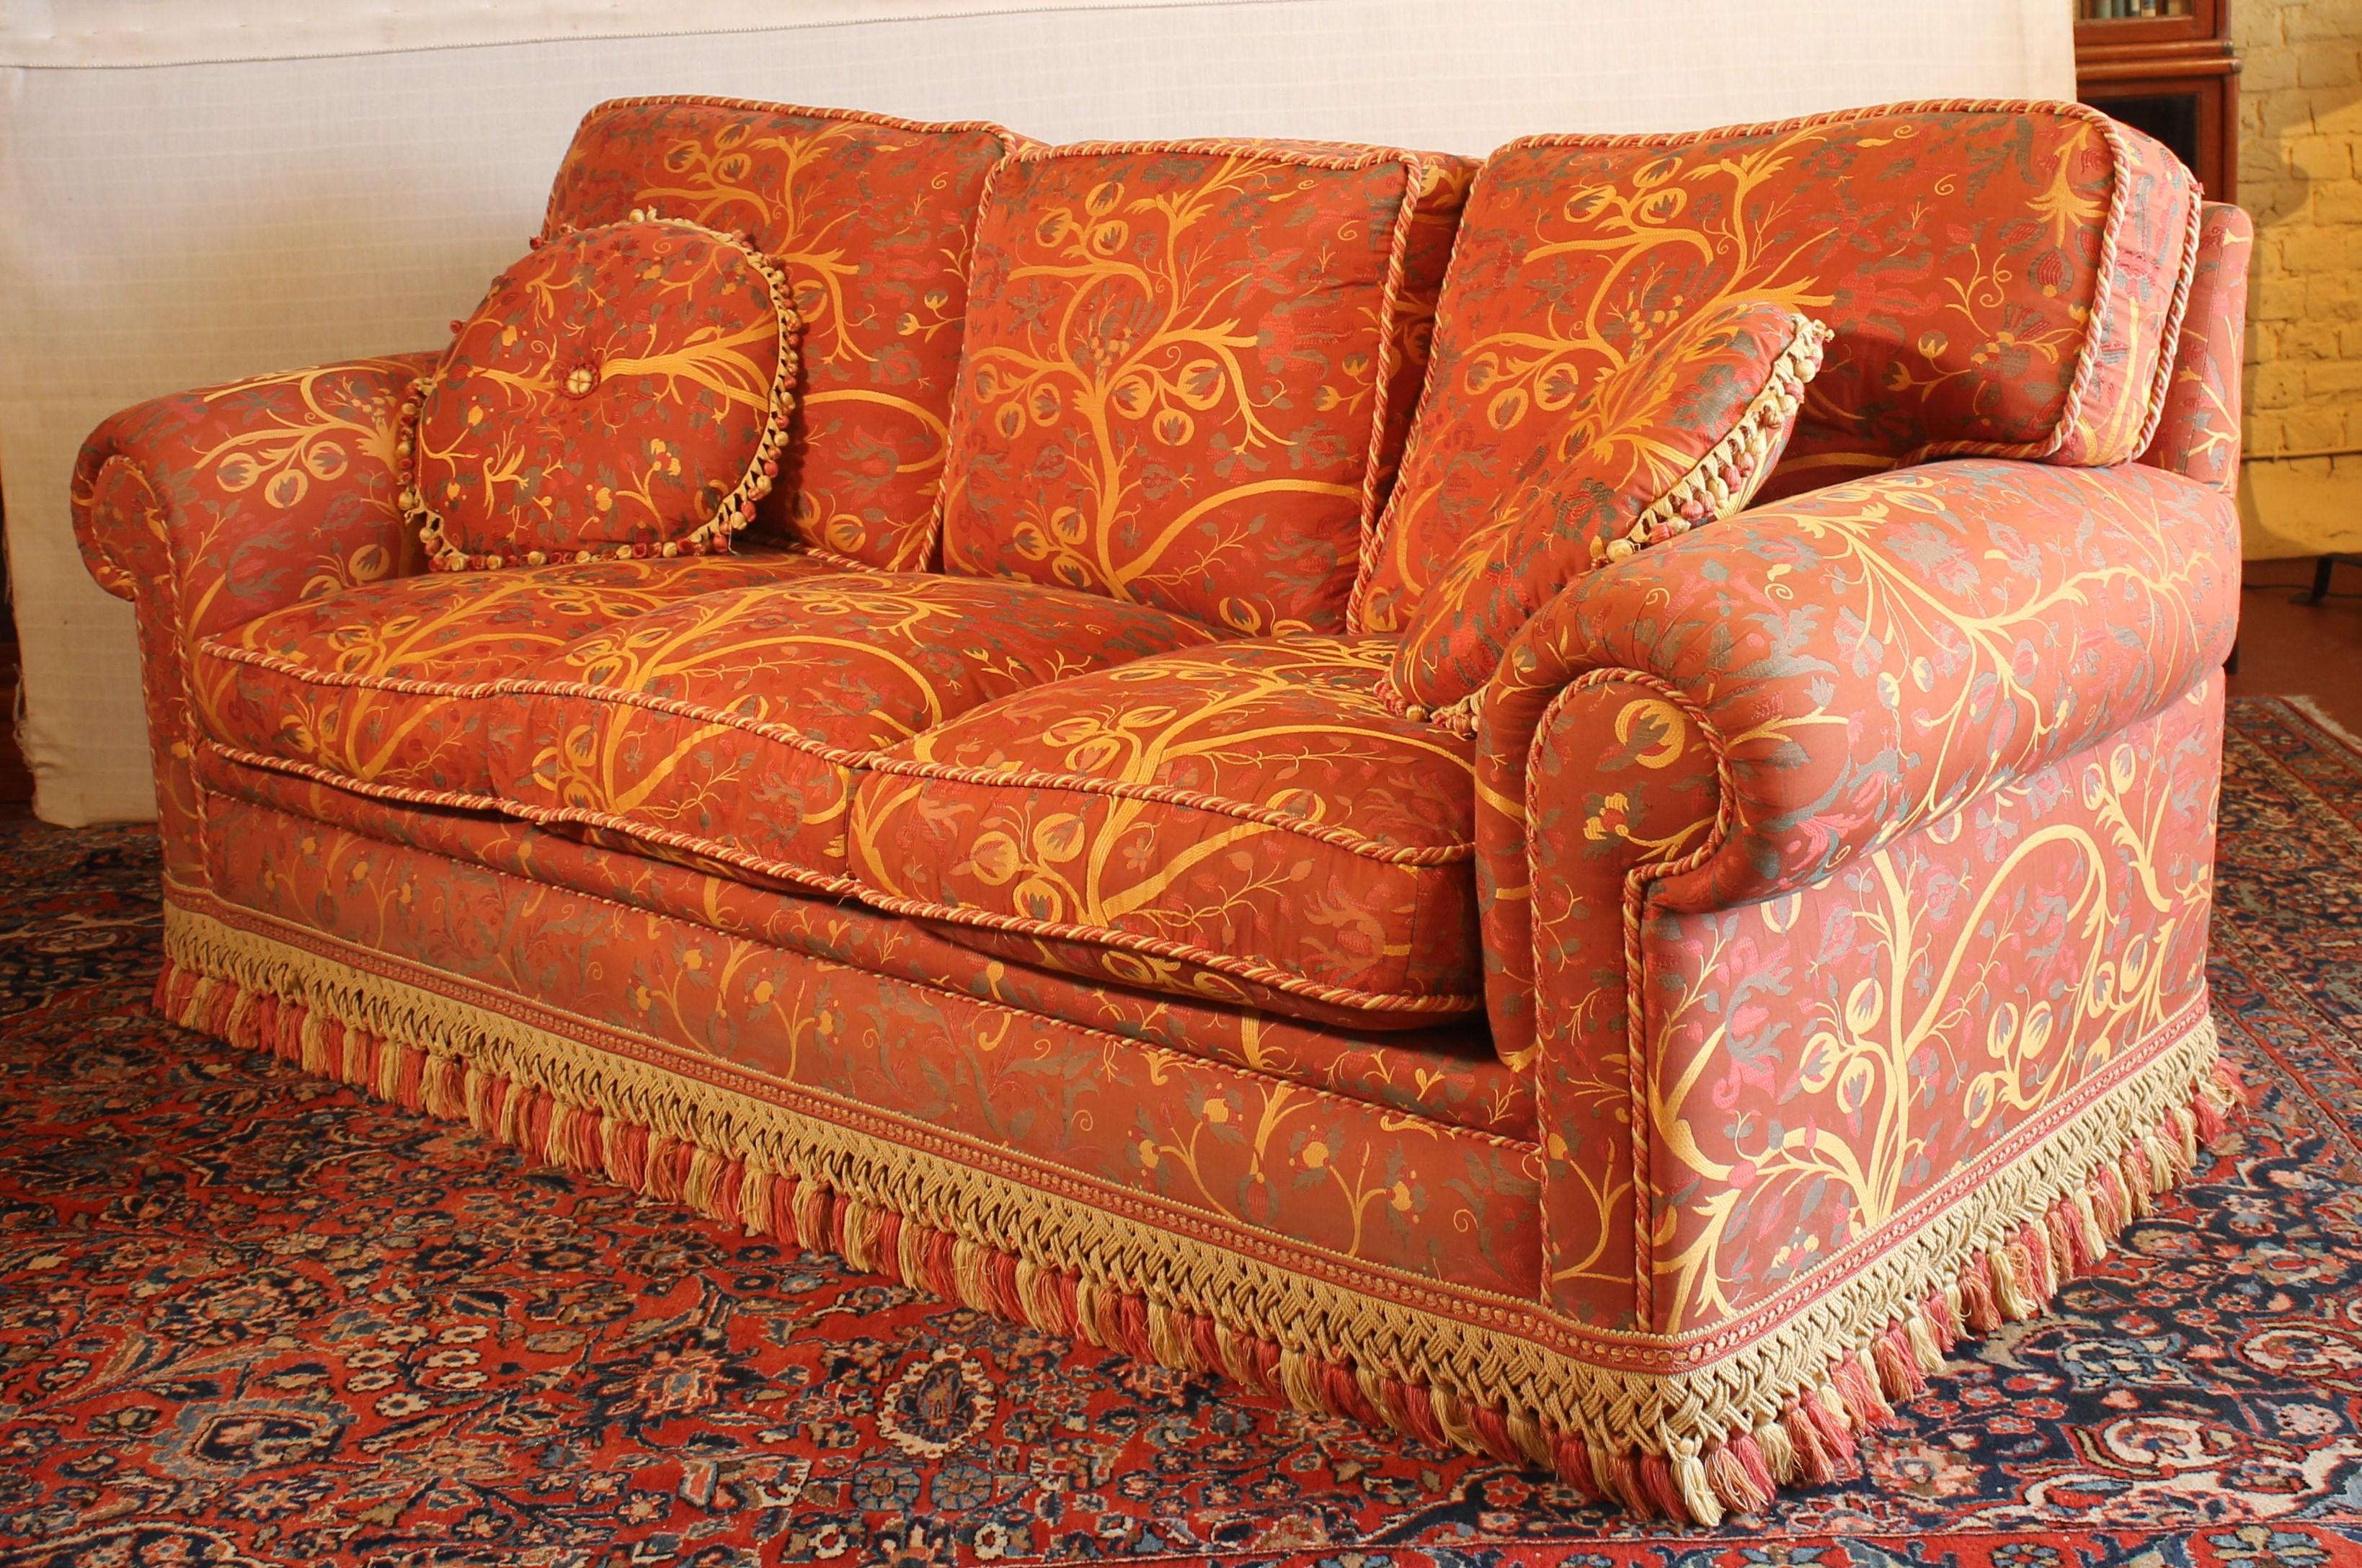 Pairs Of Sofas With Floral Decor 1